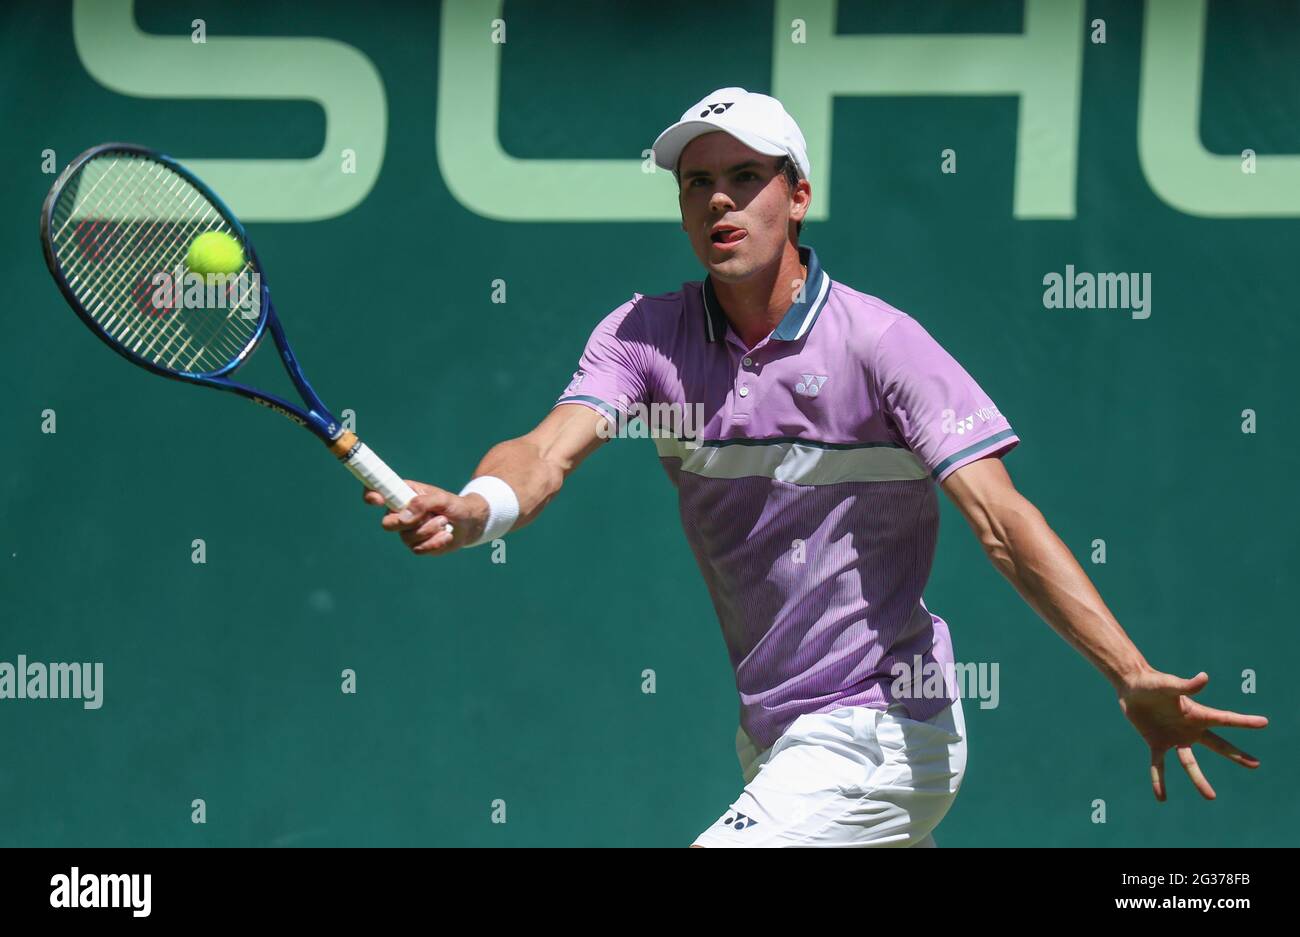 Halle, Germany. 14th June, 2021. Tennis: ATP Tour Singles, Men, 1st Round,  Thompson (Australia) - Altmaier (Germany). Daniel Altmaier plays a  forehand. Credit: Friso Gentsch/dpa/Alamy Live News Stock Photo - Alamy